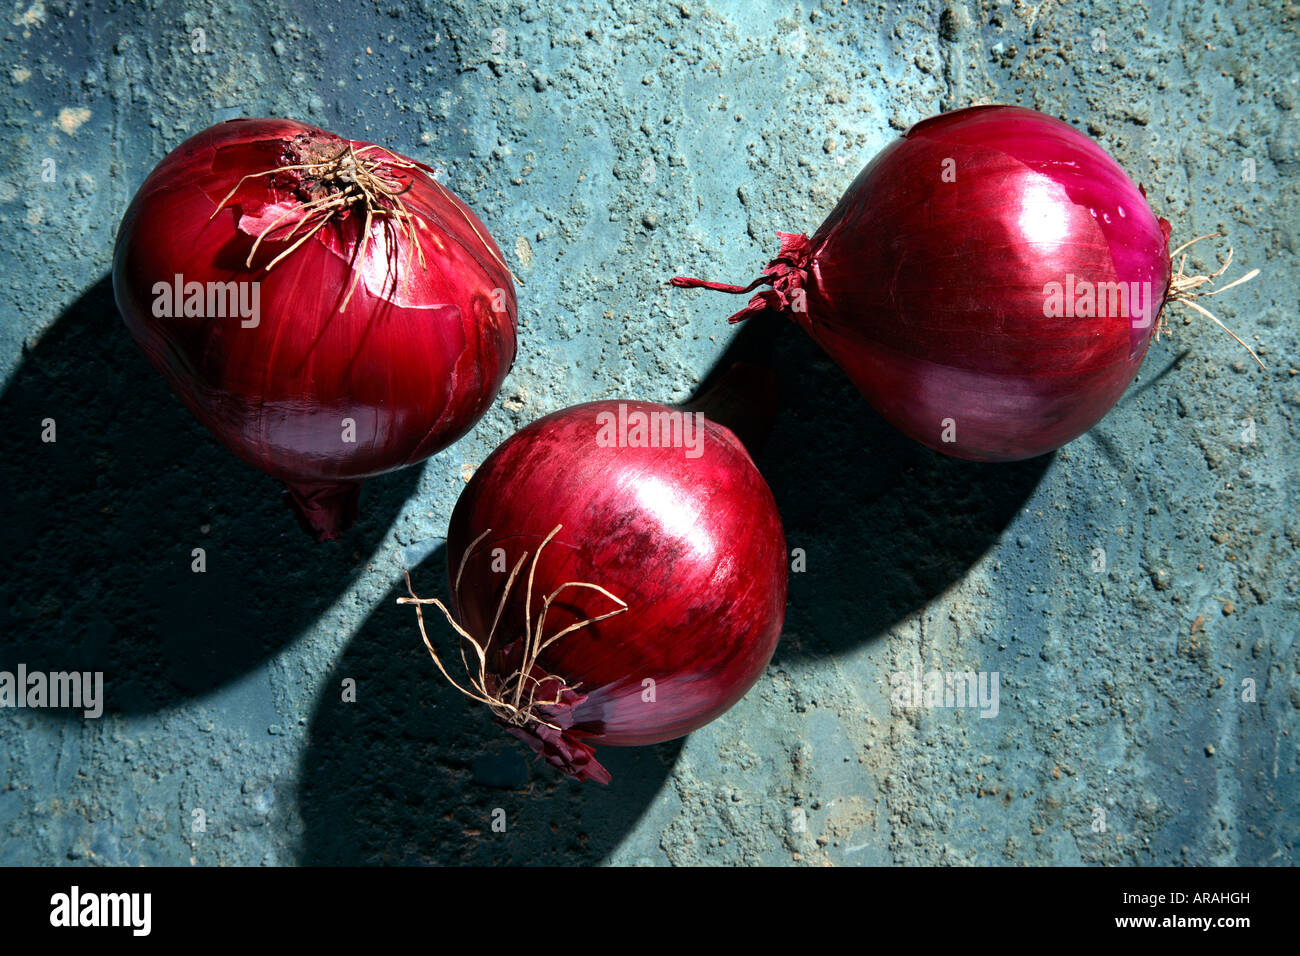 Red onions on a rustic blue background. Stock Photo